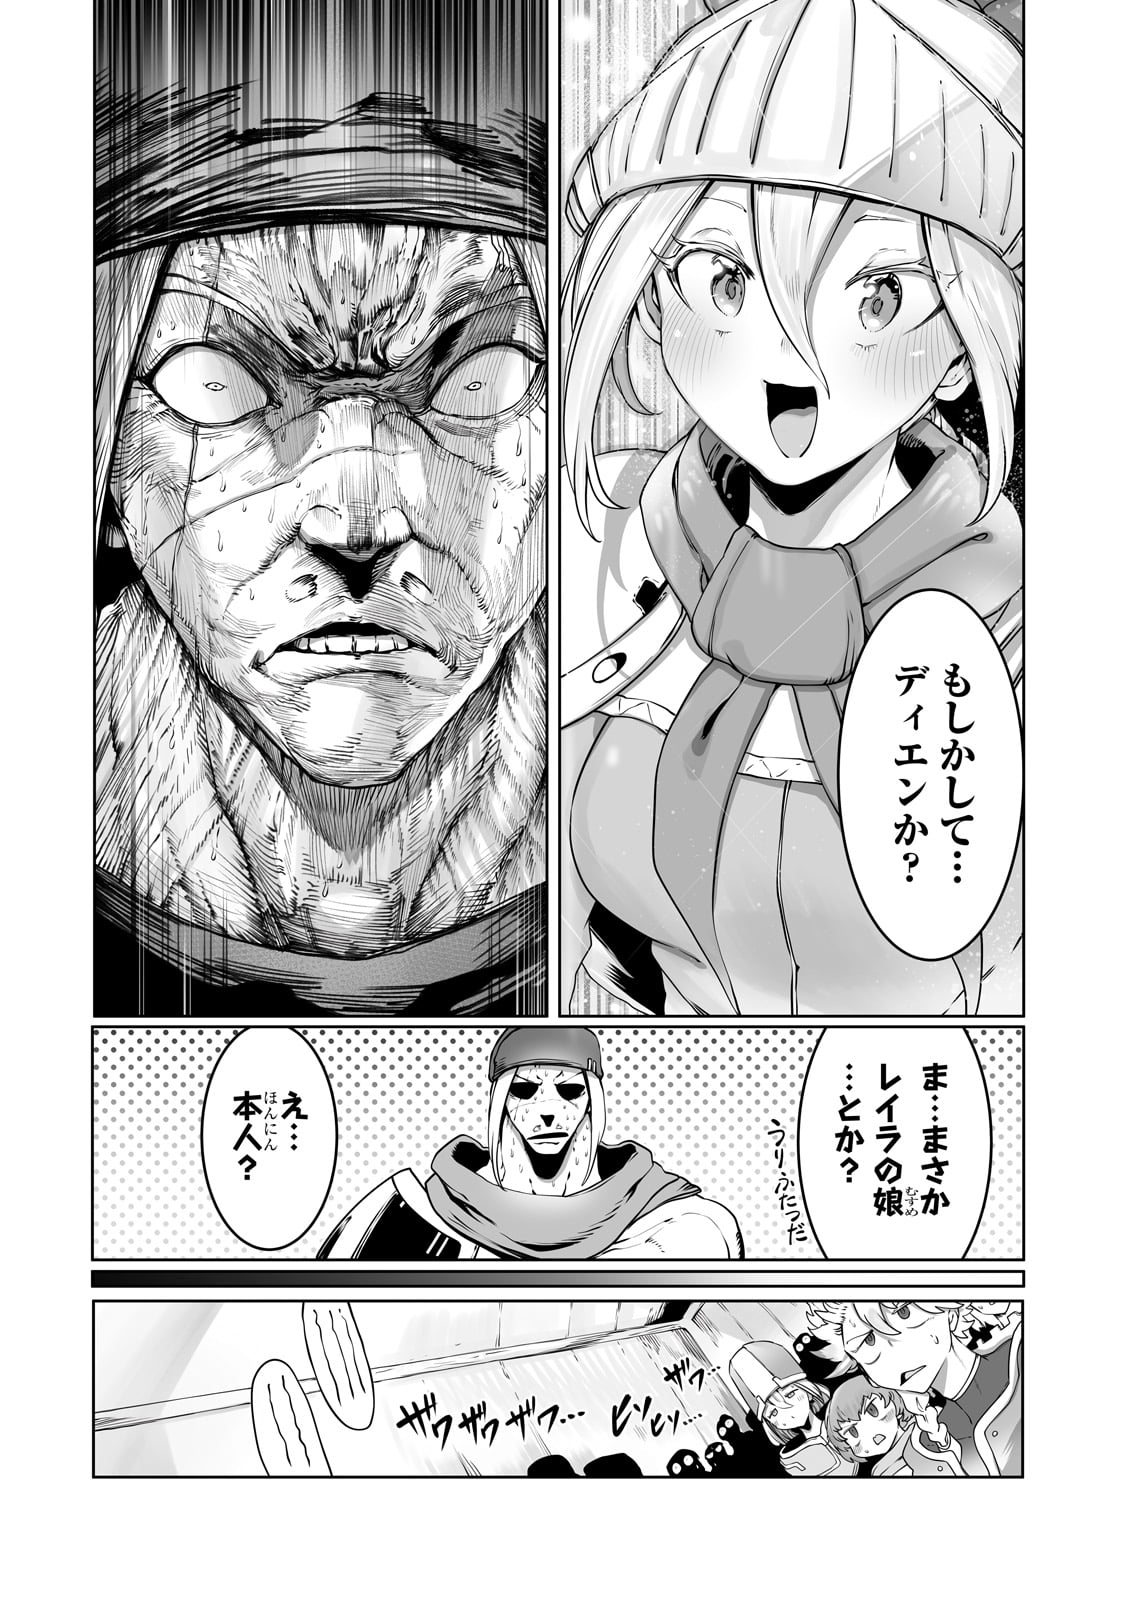 The Useless Tamer Will Turn Into the Top Unconsciously by My Previous Life Knowledge - Chapter 33 - Page 2